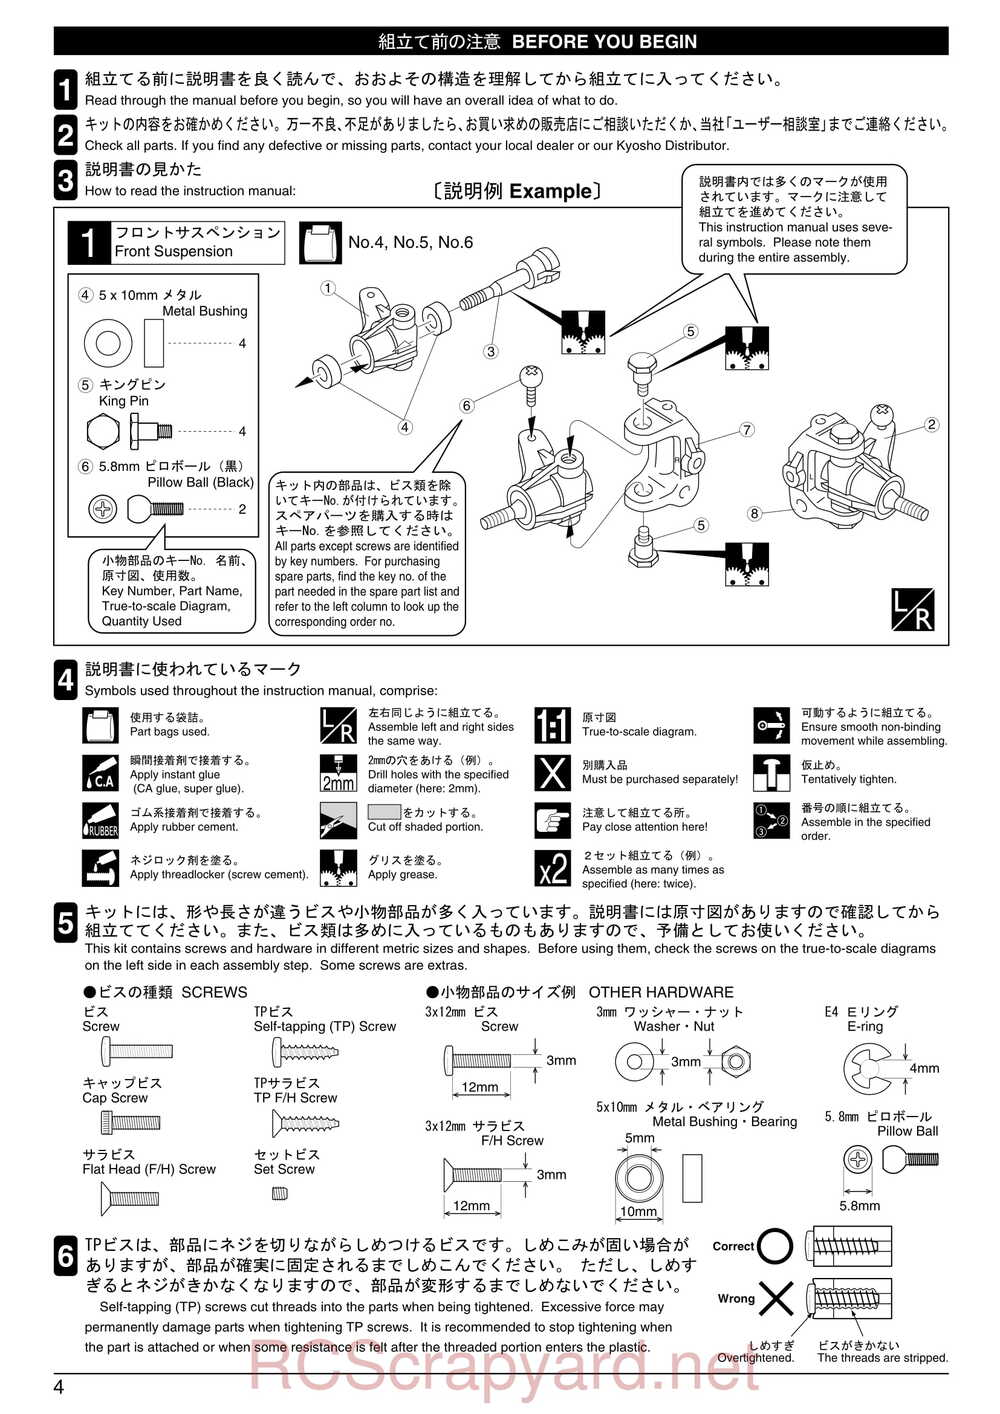 Kyosho - 31102 - V-One RR - Manual - Page 04